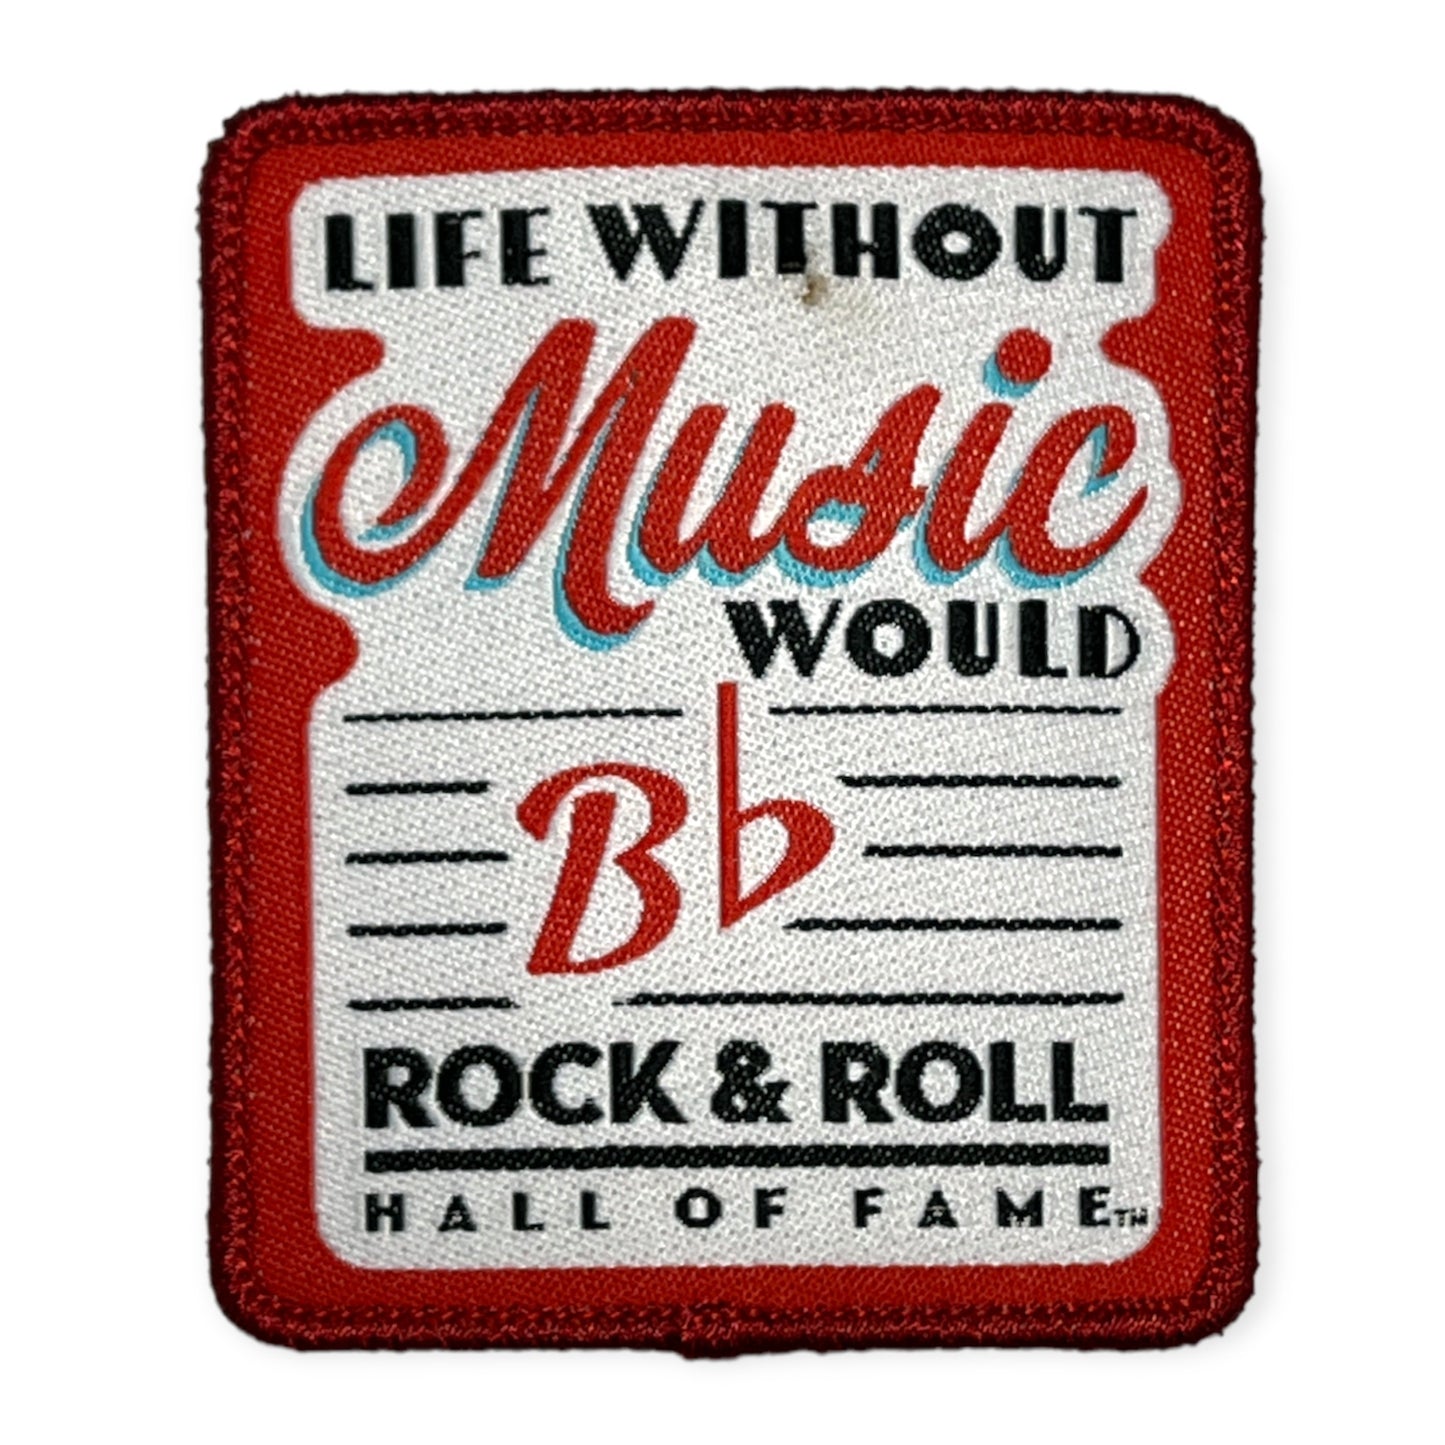 ROCK HALL LIFE WITHOUT MUSIC PATCH